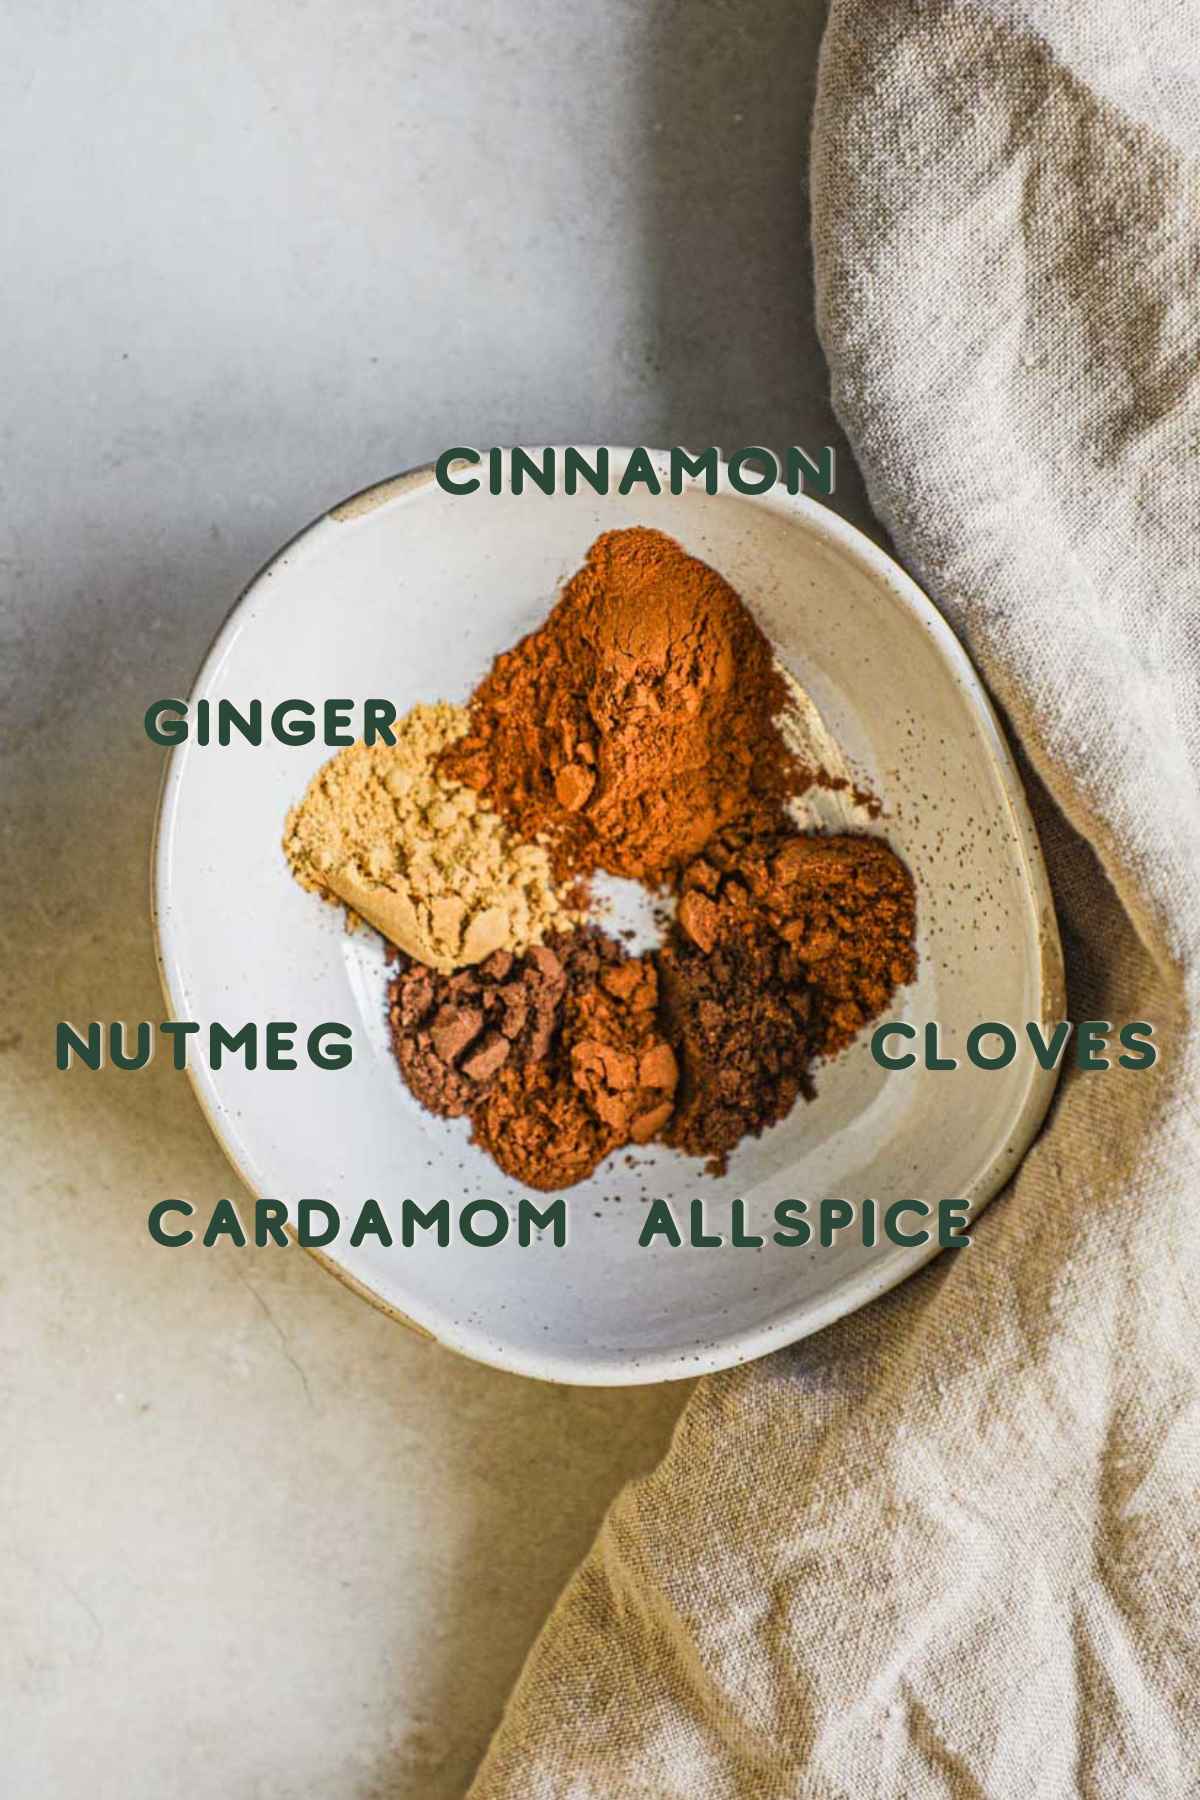 Ingredients for chai spice mix, cinnamon, nutmeg, cardamom, allspice, ginger, and cloves.